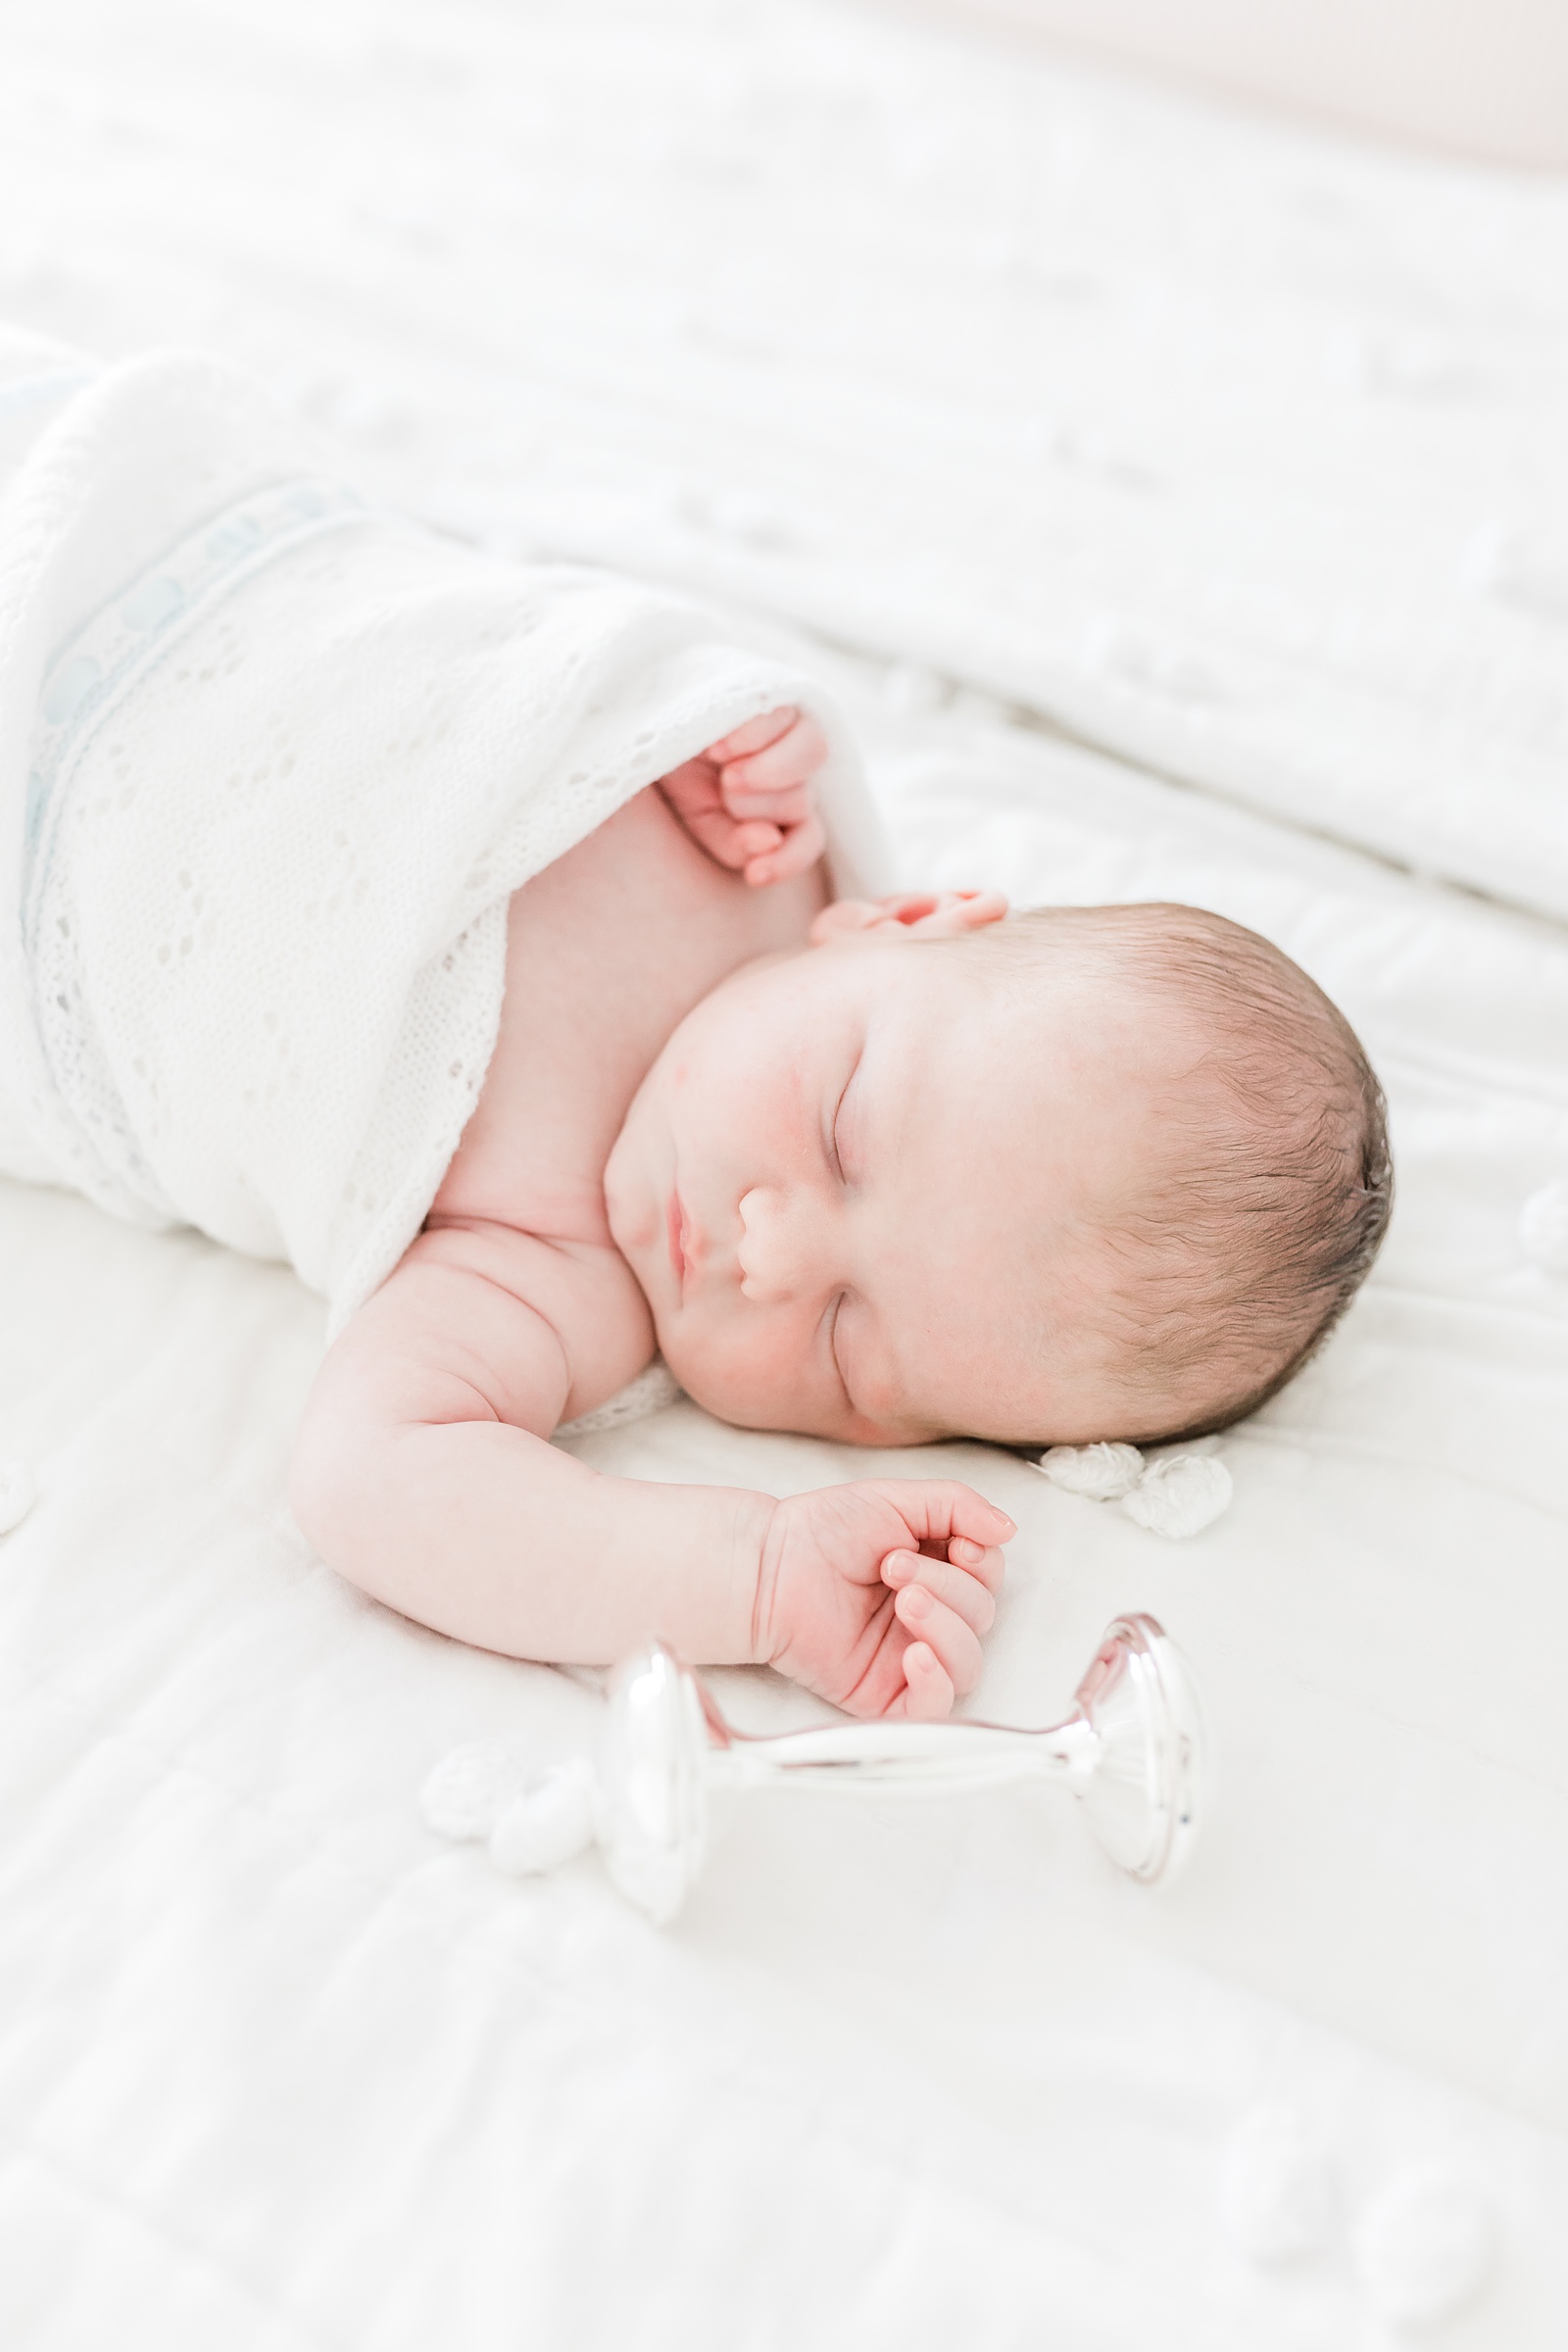 Baby boy sleeping in Feltman Brother's blanket with rattle by Caitlyn Motycka Photography